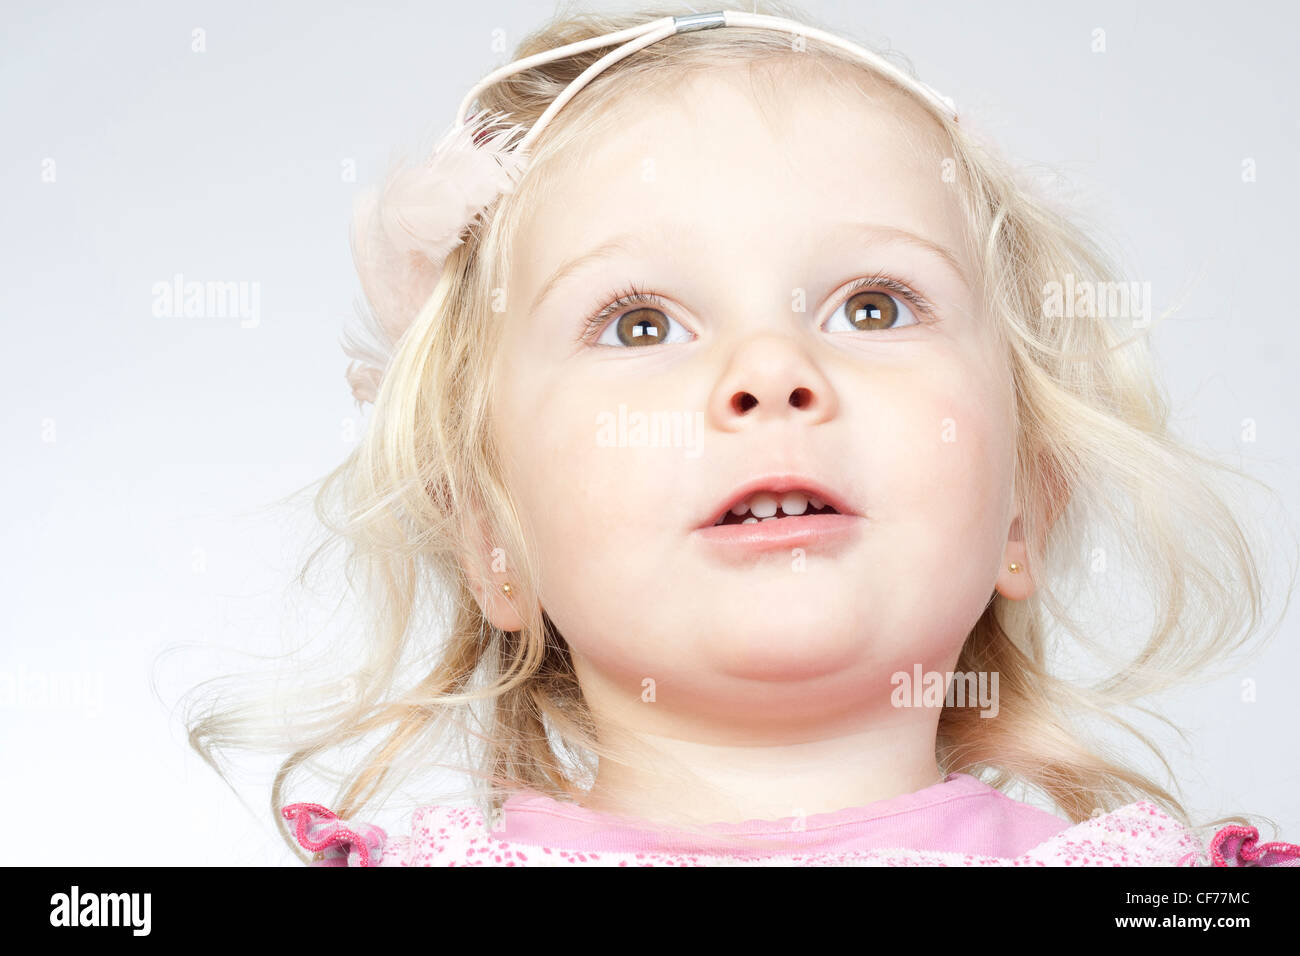 A beautiful blond baby girl looking up with expectation, dressing a pink hair band Stock Photo